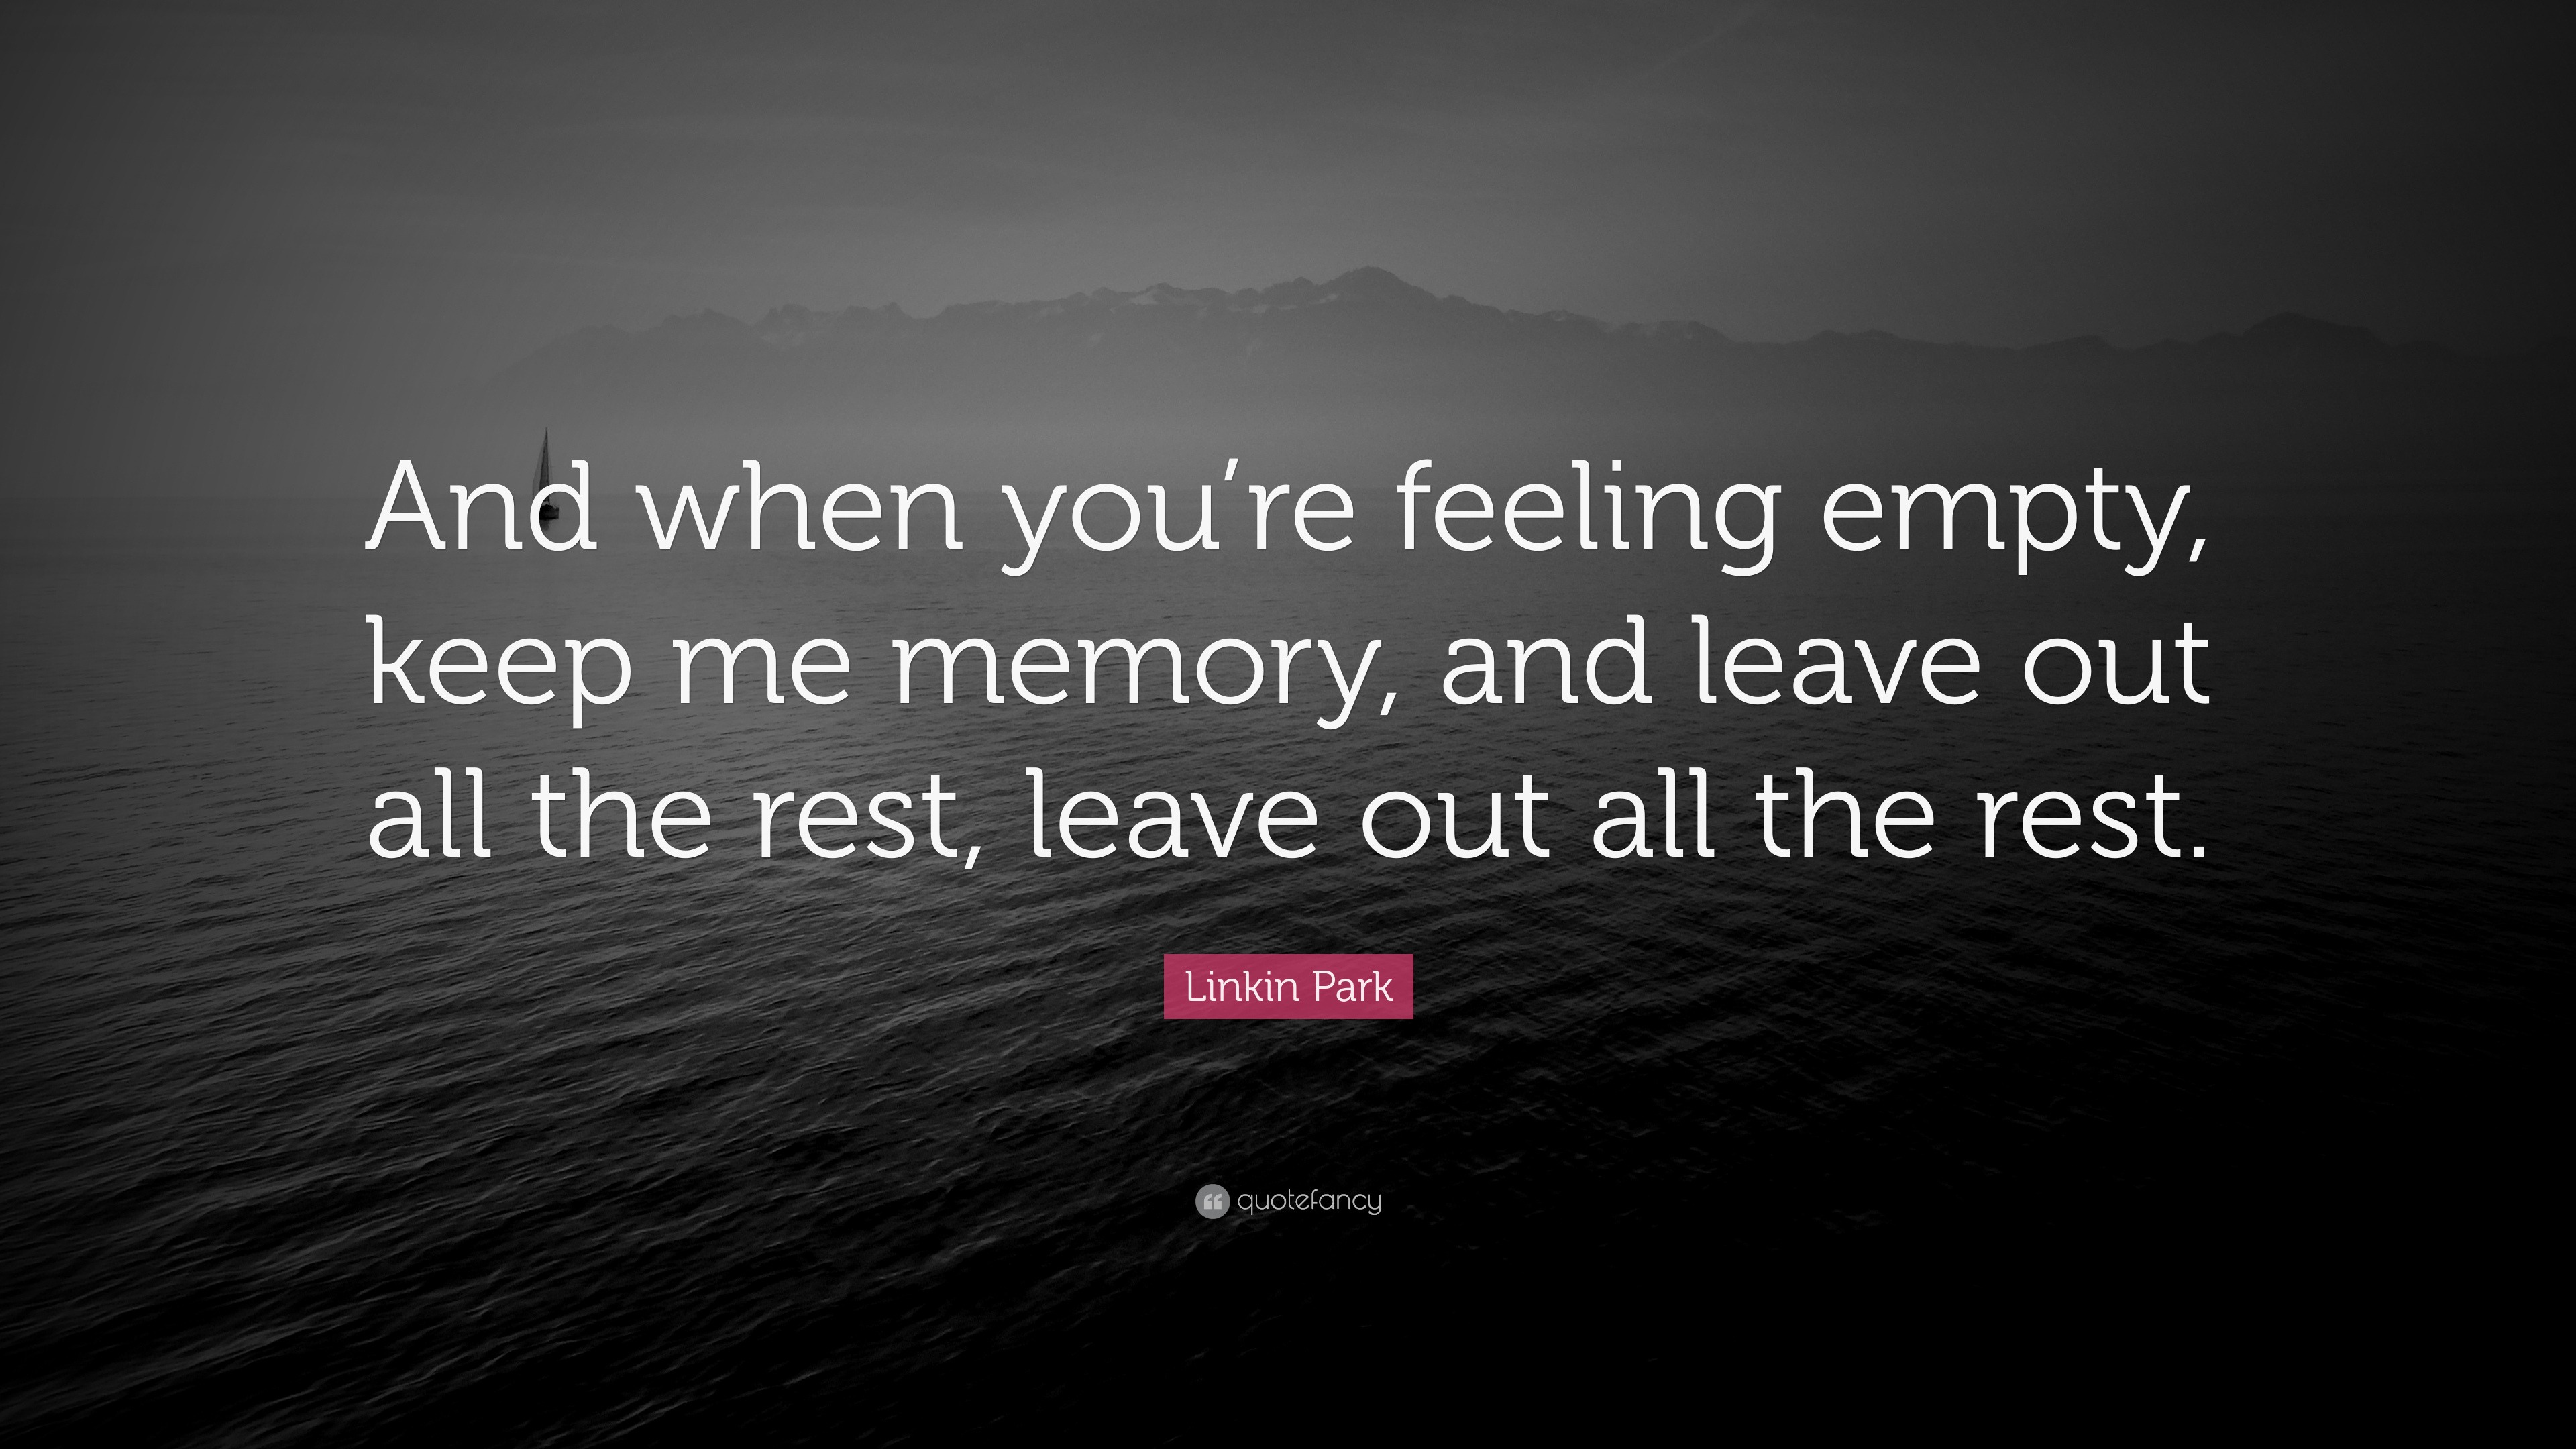 Linkin Park Quote: "And when you're feeling empty, keep me ...